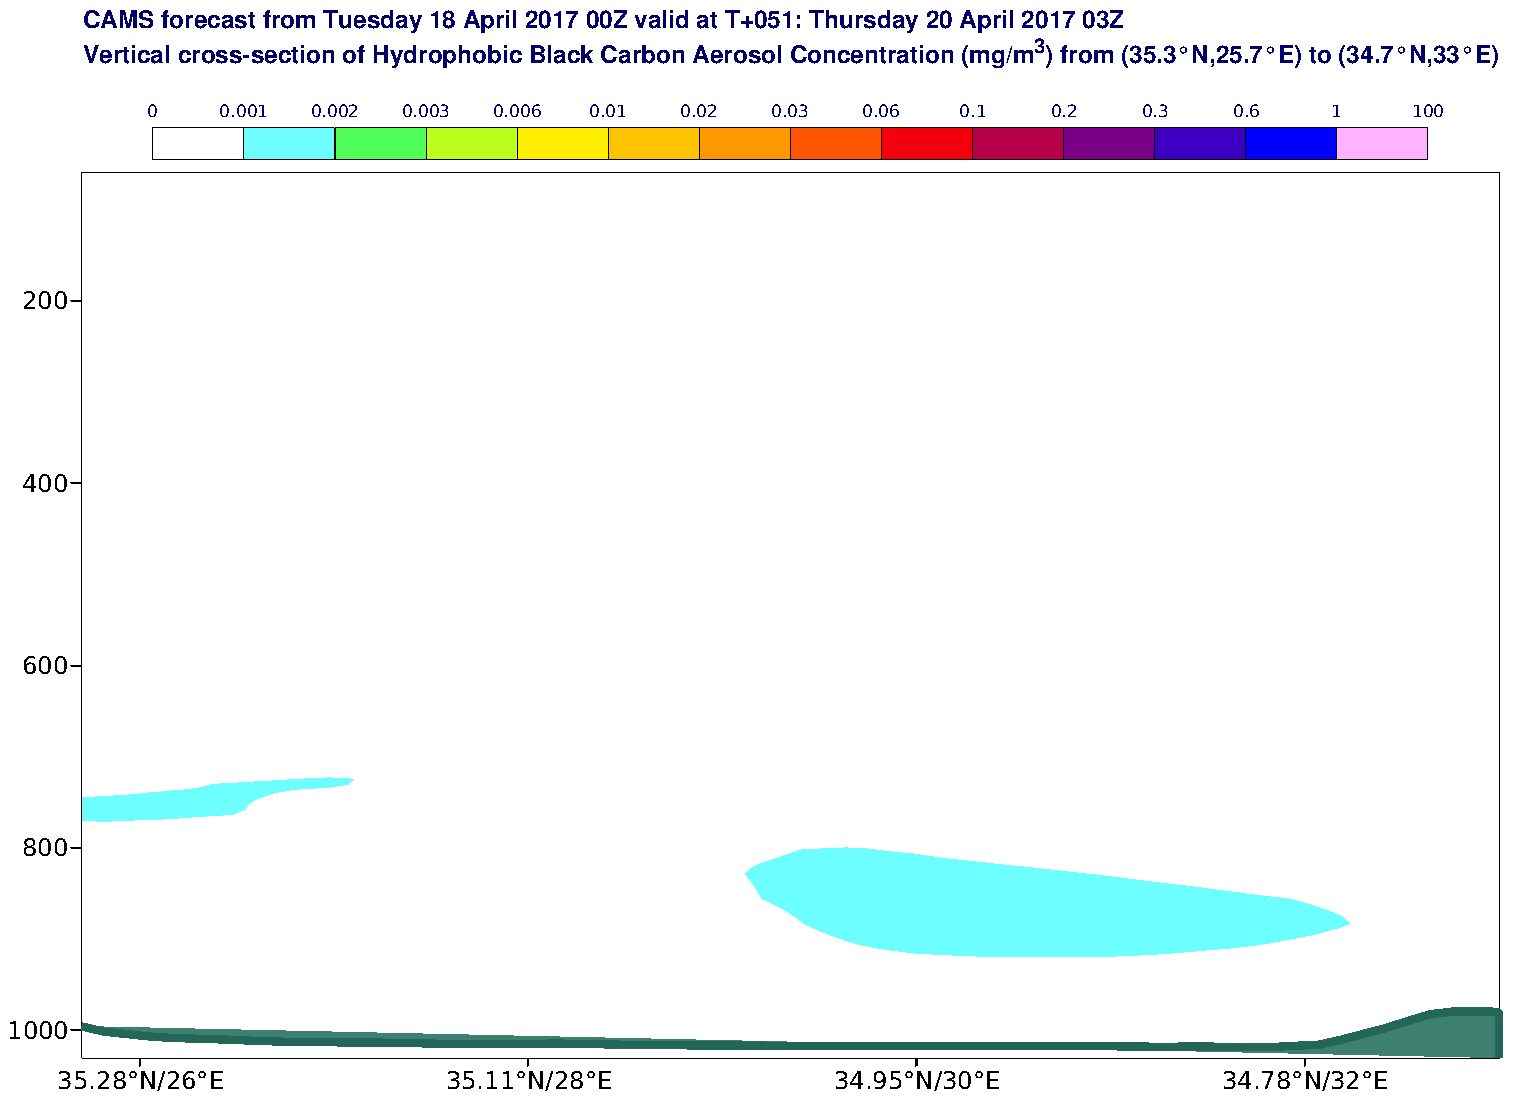 Vertical cross-section of Hydrophobic Black Carbon Aerosol Concentration (mg/m3) valid at T51 - 2017-04-20 03:00